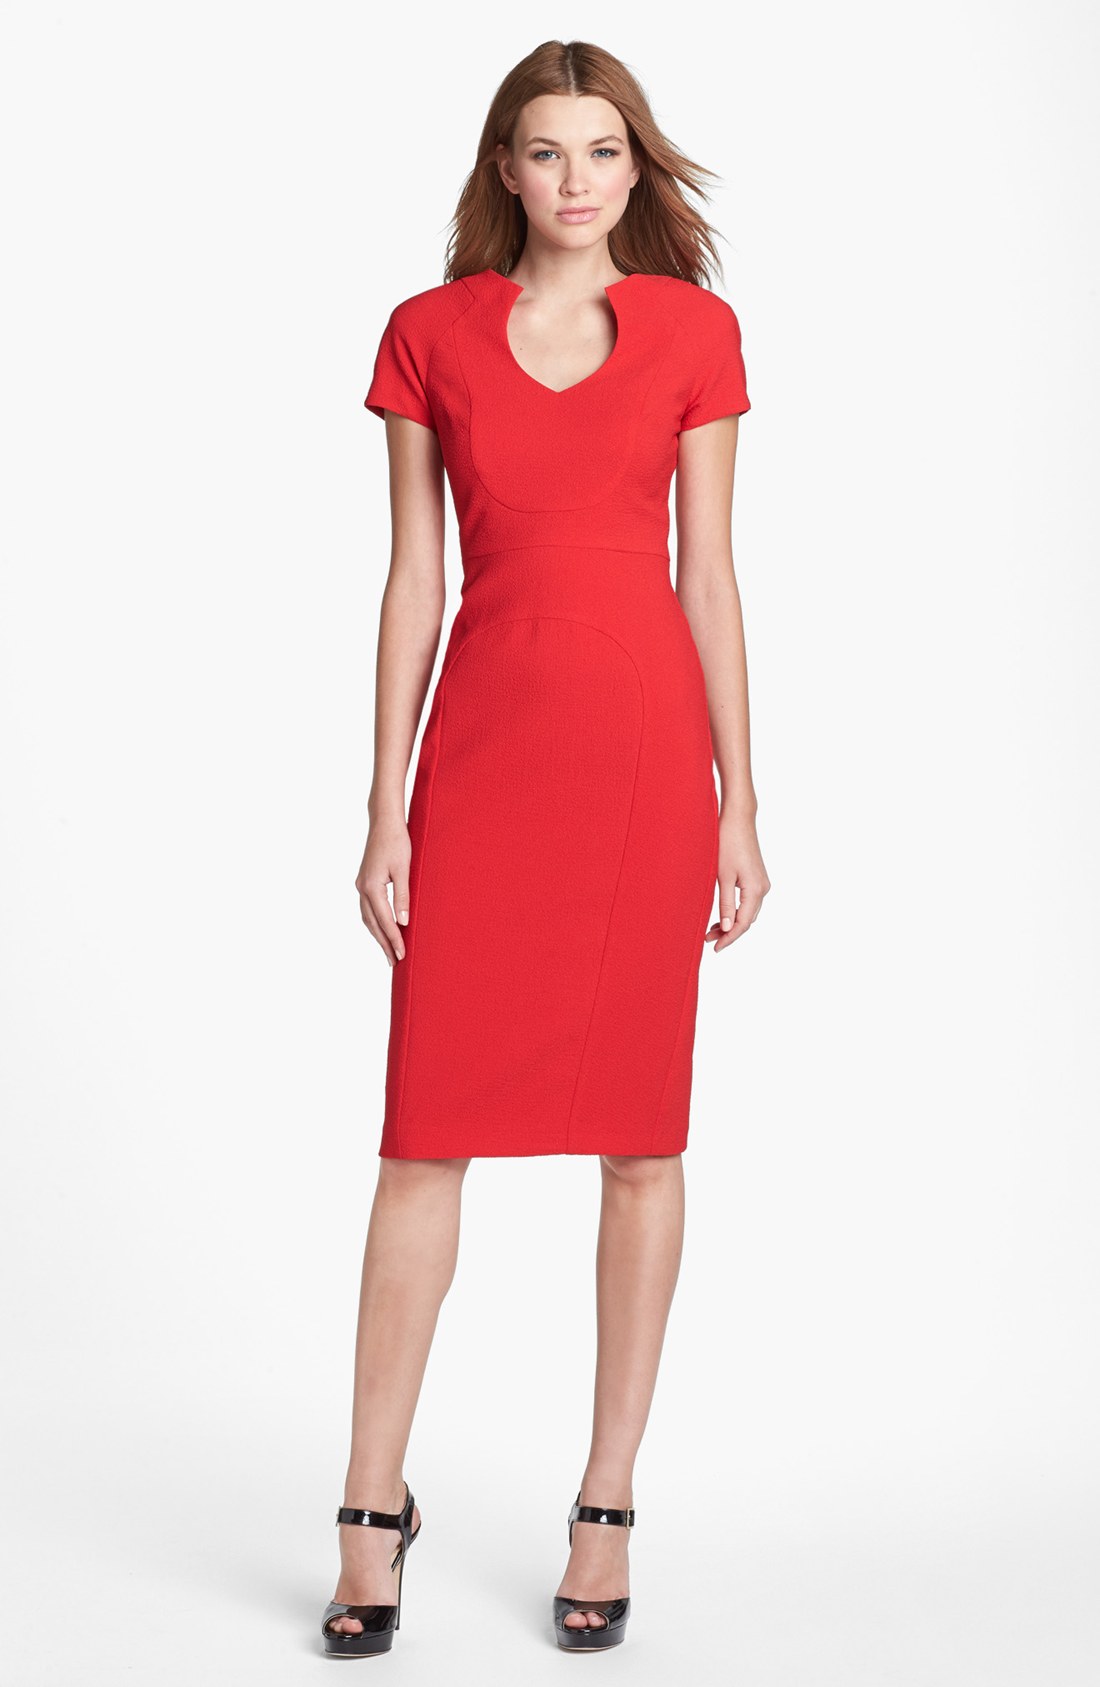 Black Halo Gypsy Rose Crepe Sheath Dress in Red (Wildfire) | Lyst